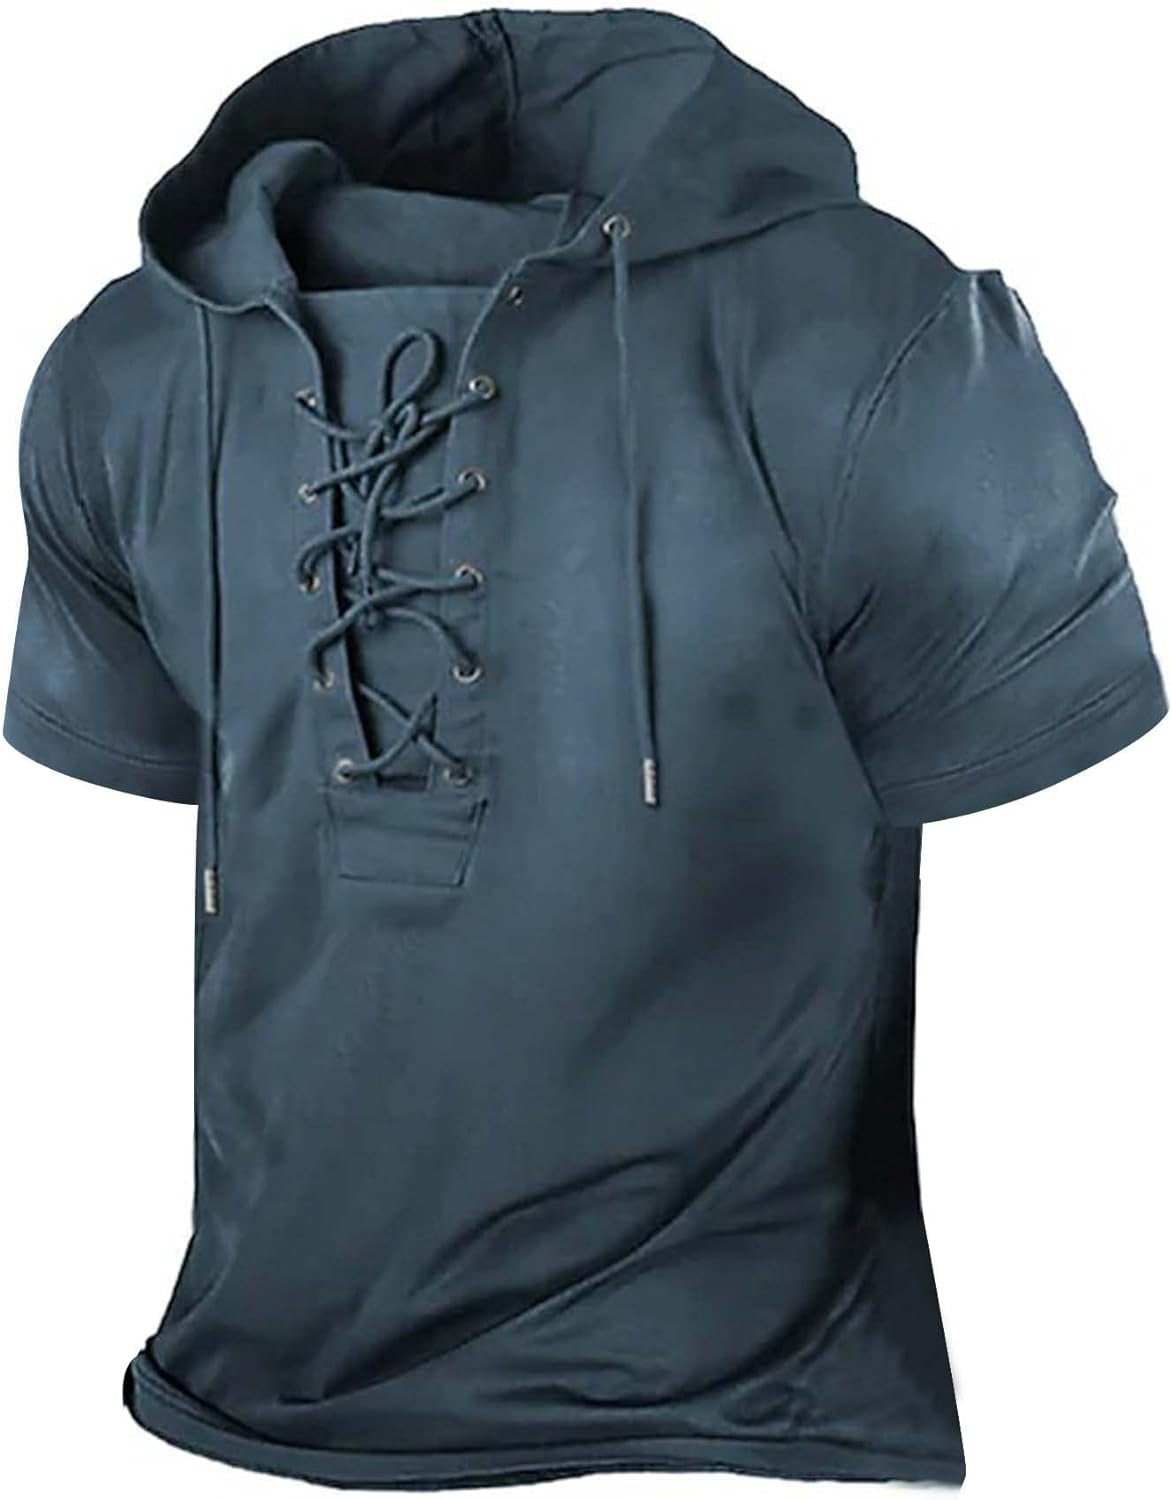 Mens Distressed Tactical Hoodies Sweatshirts Rotro Lace up Hooded Pullover Outdoor Sports Long/Short Sleeve Shirts